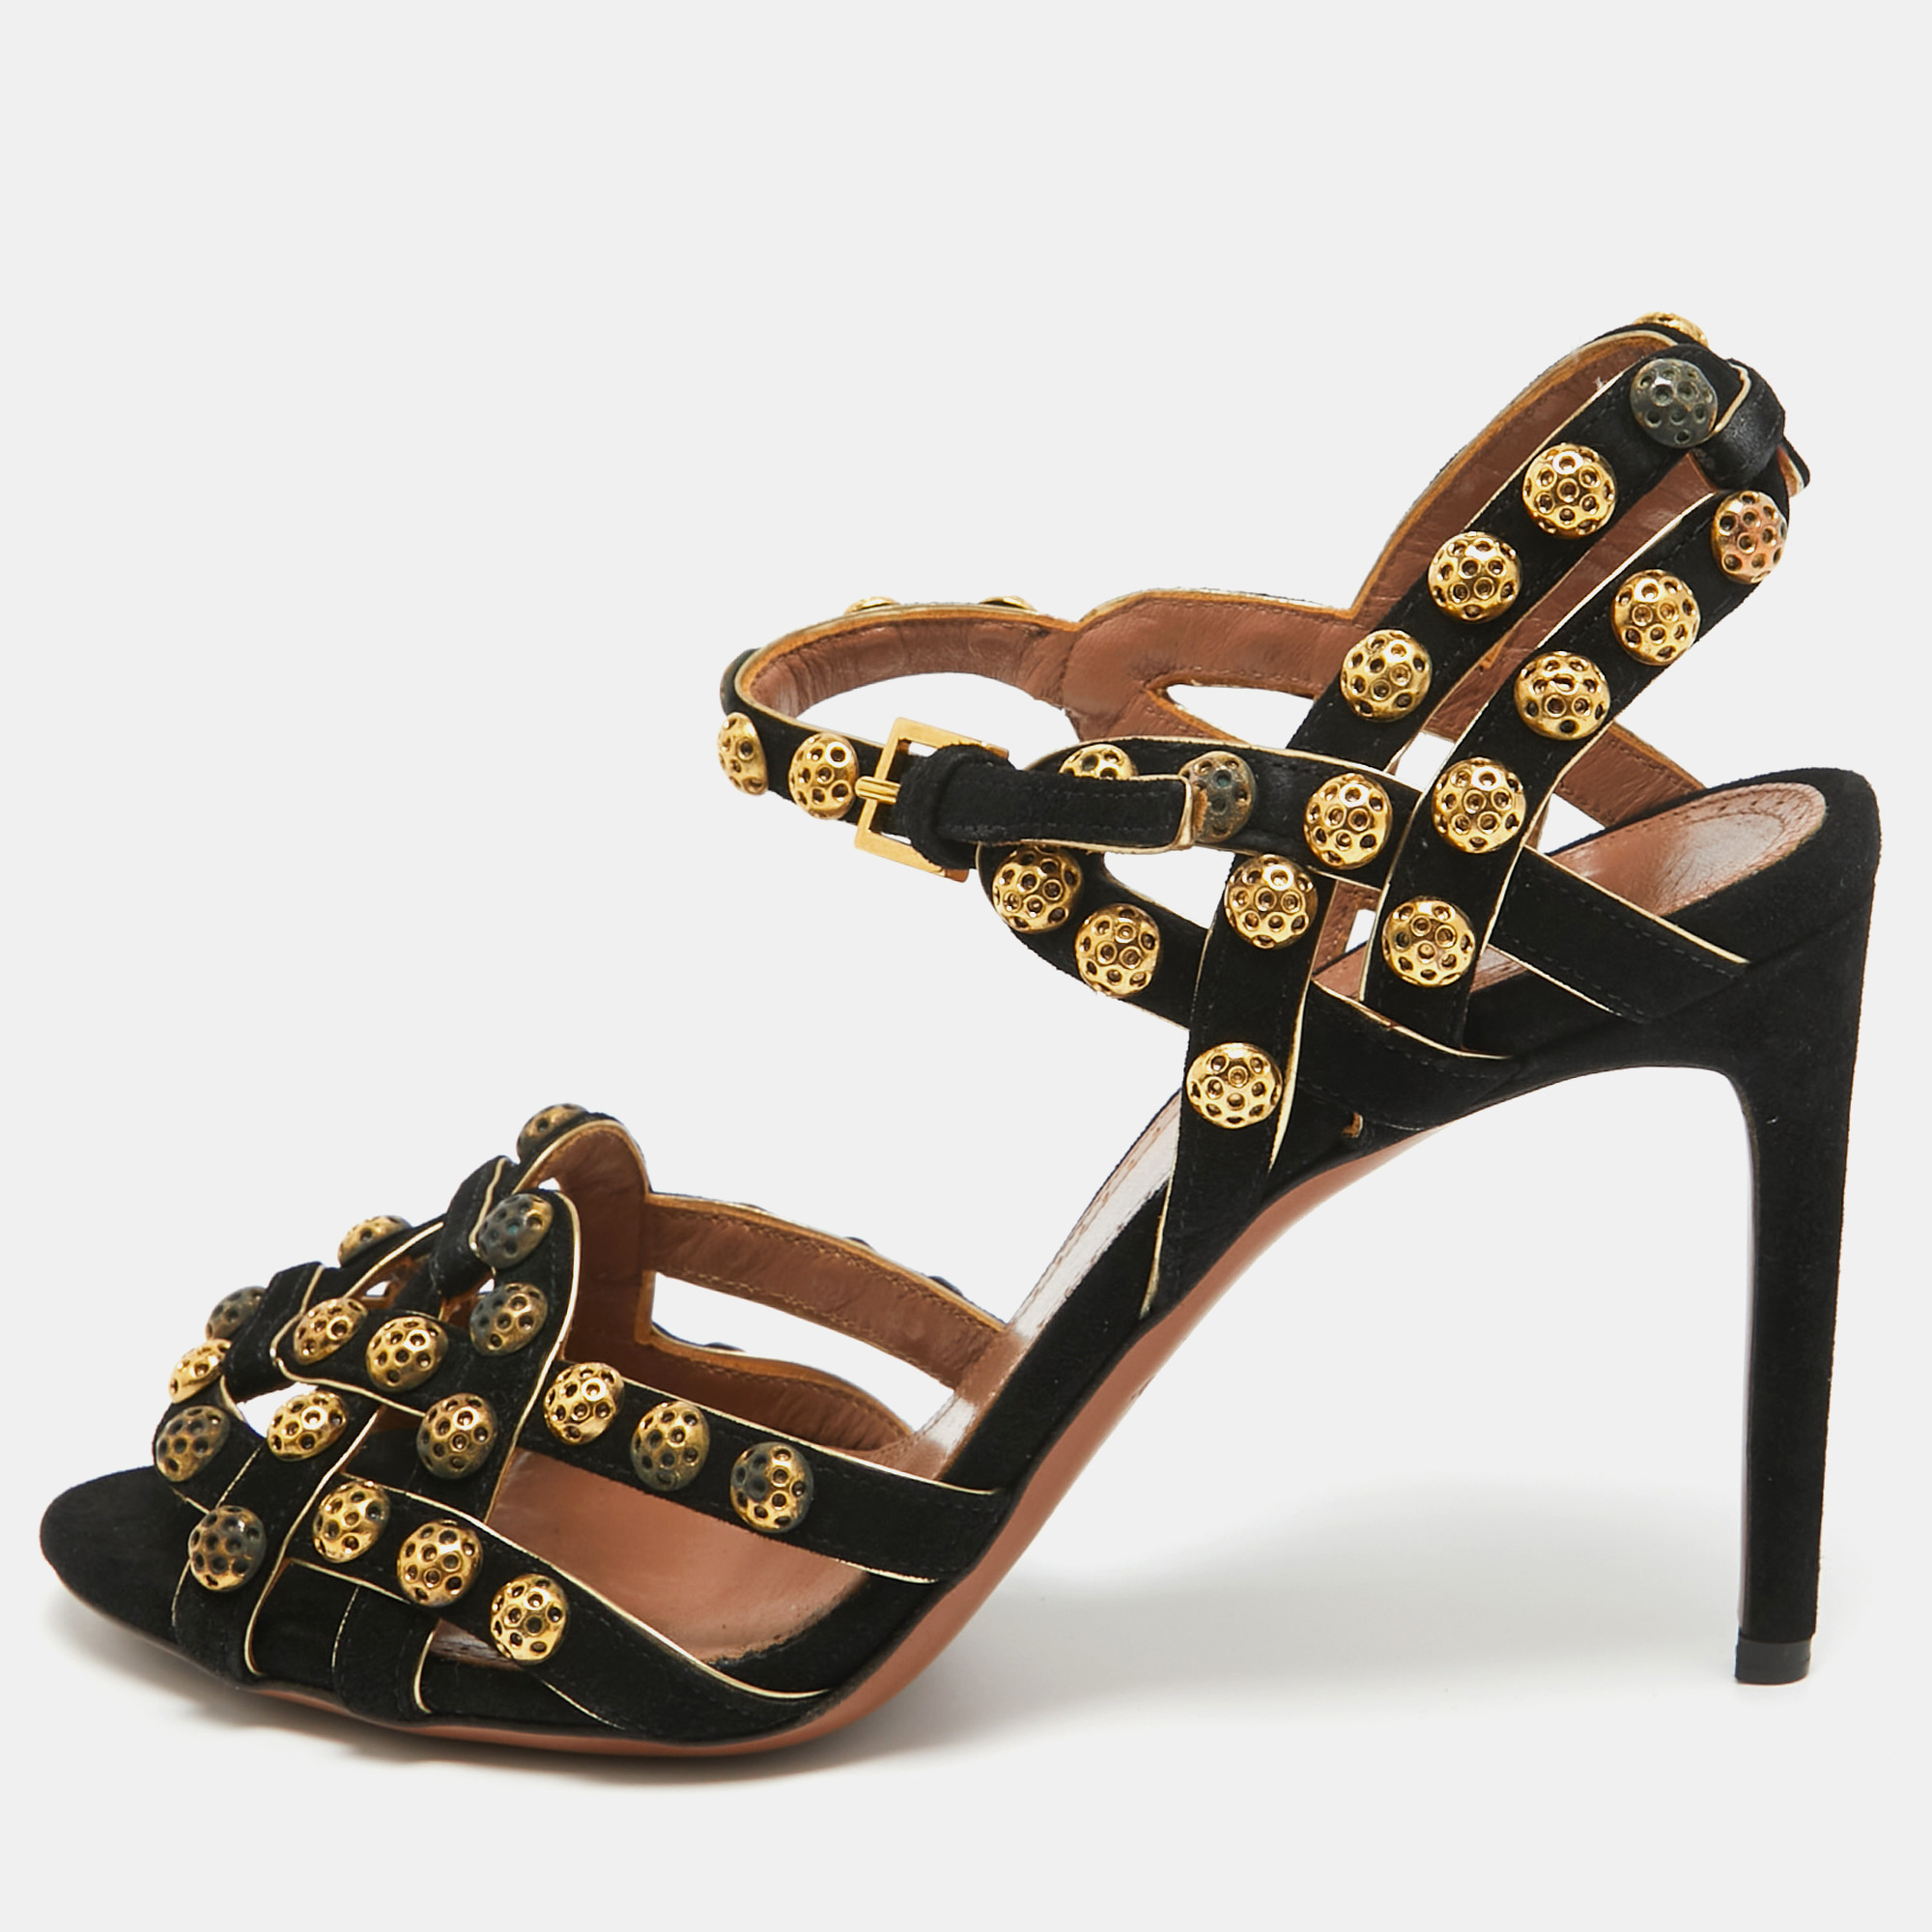 

Alaia Black Suede Studded Ankle Strap Sandals Size